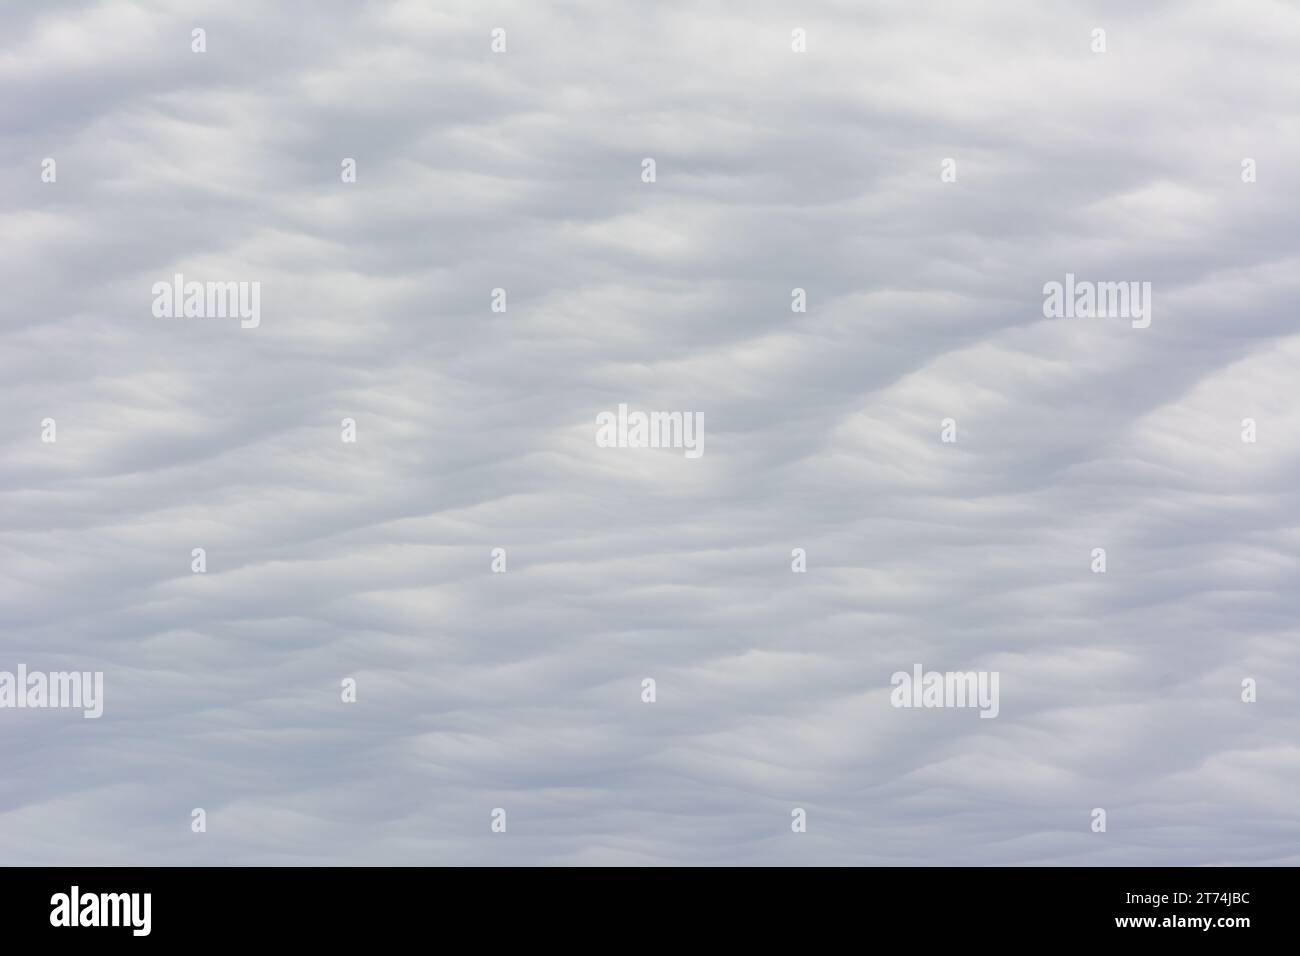 Abstract cloud texture with a wavy, sand dune pattern. Stock Photo